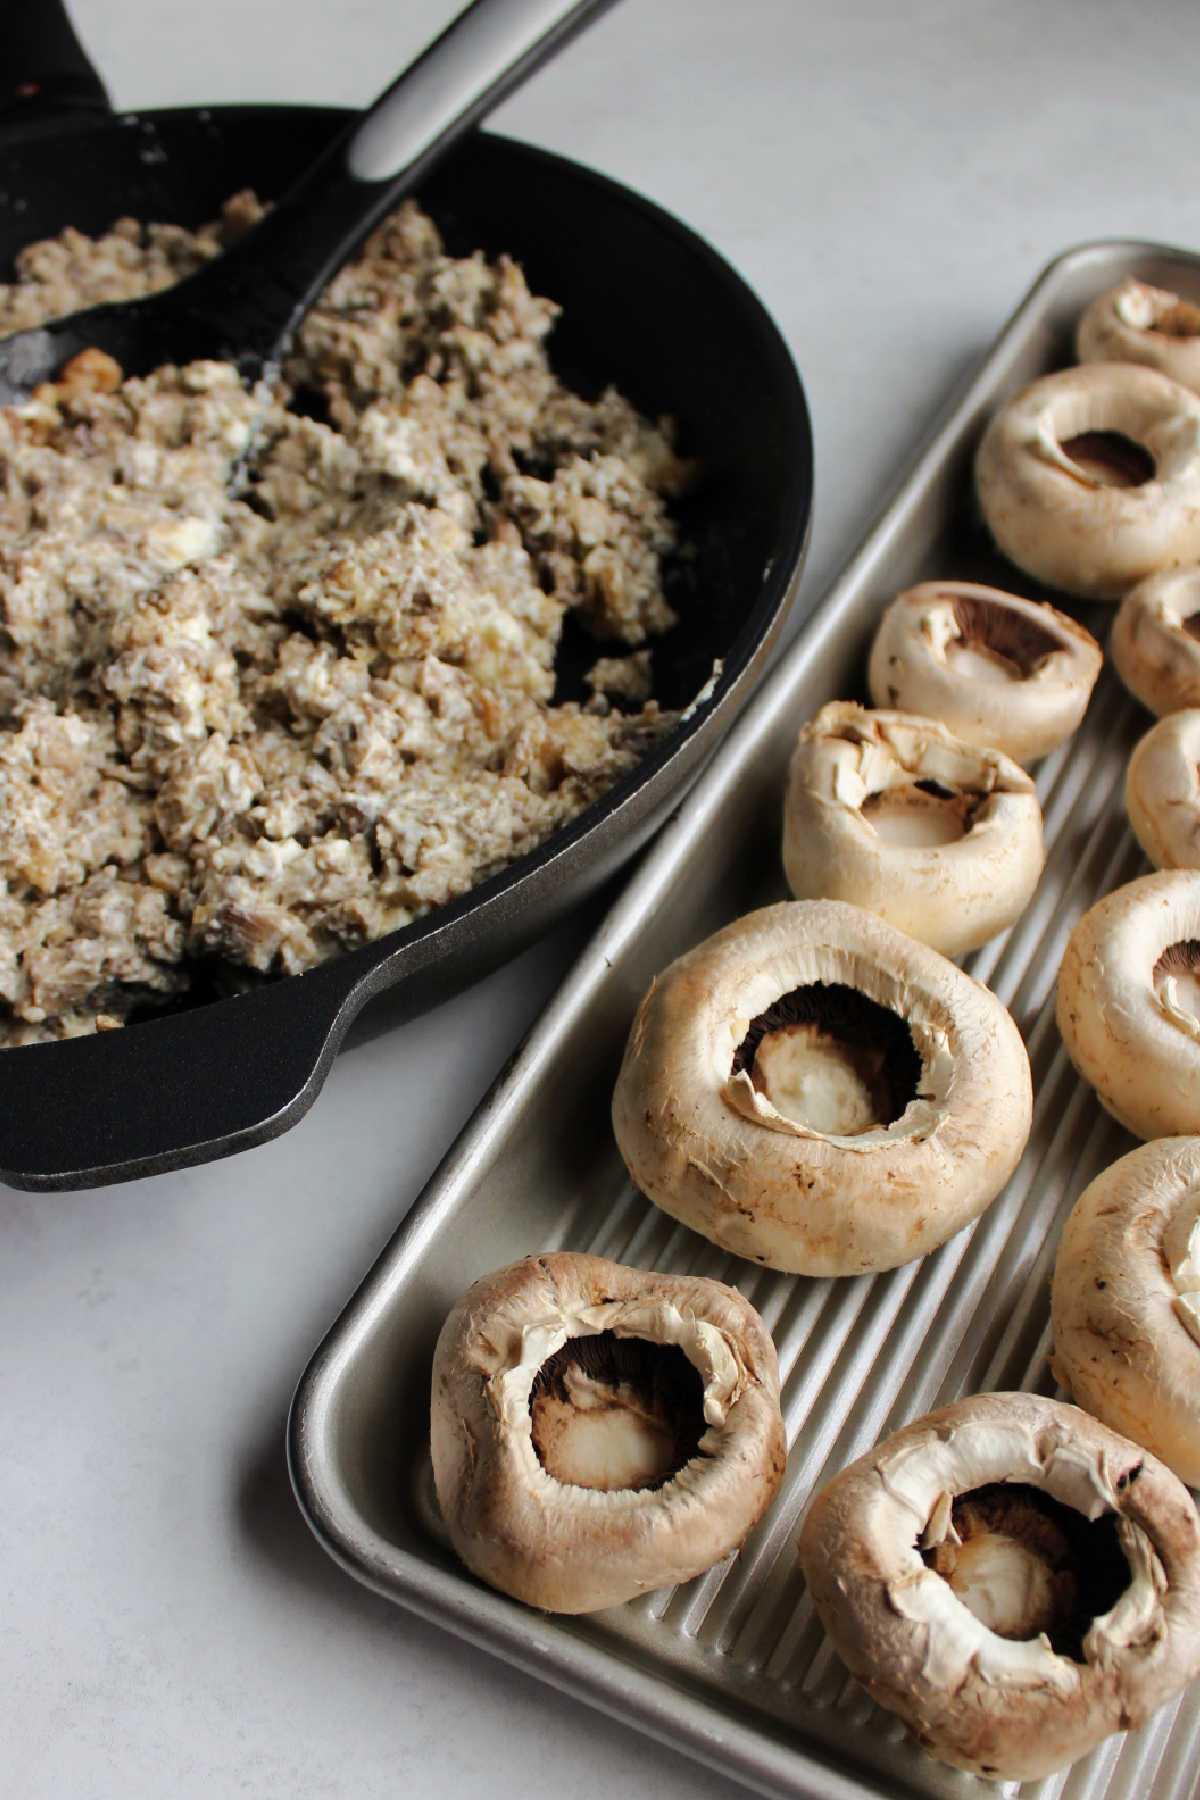 Tray of mushroom tops next to skillet filled with cream cheese and sausage mixture.